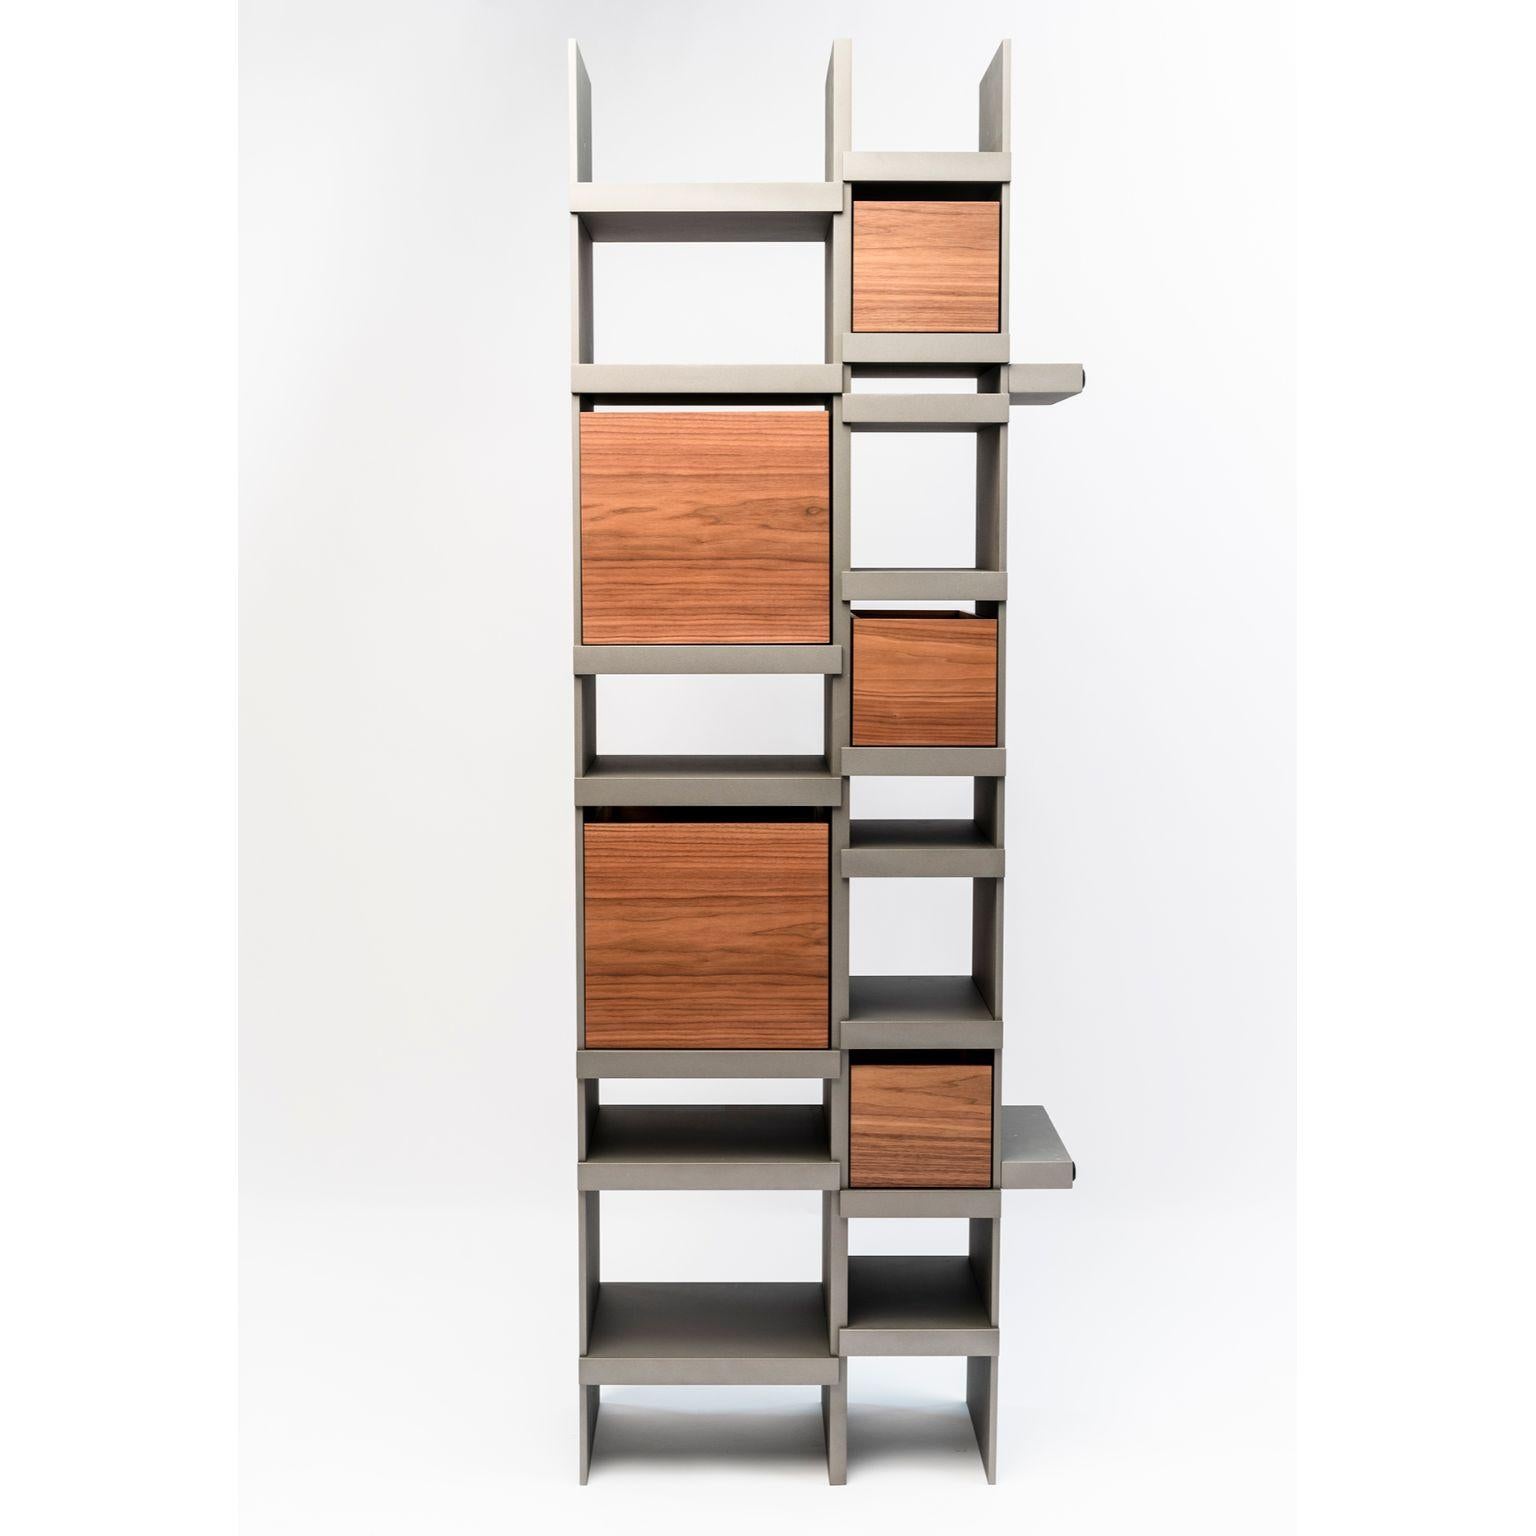 Pyrite vertical bookshelf by Luca Nichetto
Materials: drawers: noce canaletto solid wood, leather.
 Structure: dark green / coral / nero ferro / light grey.
/ peltro lacquered multilayer wood.
Dimensions: W 59 x D 31.6 x H 200 cm.

Inspired by